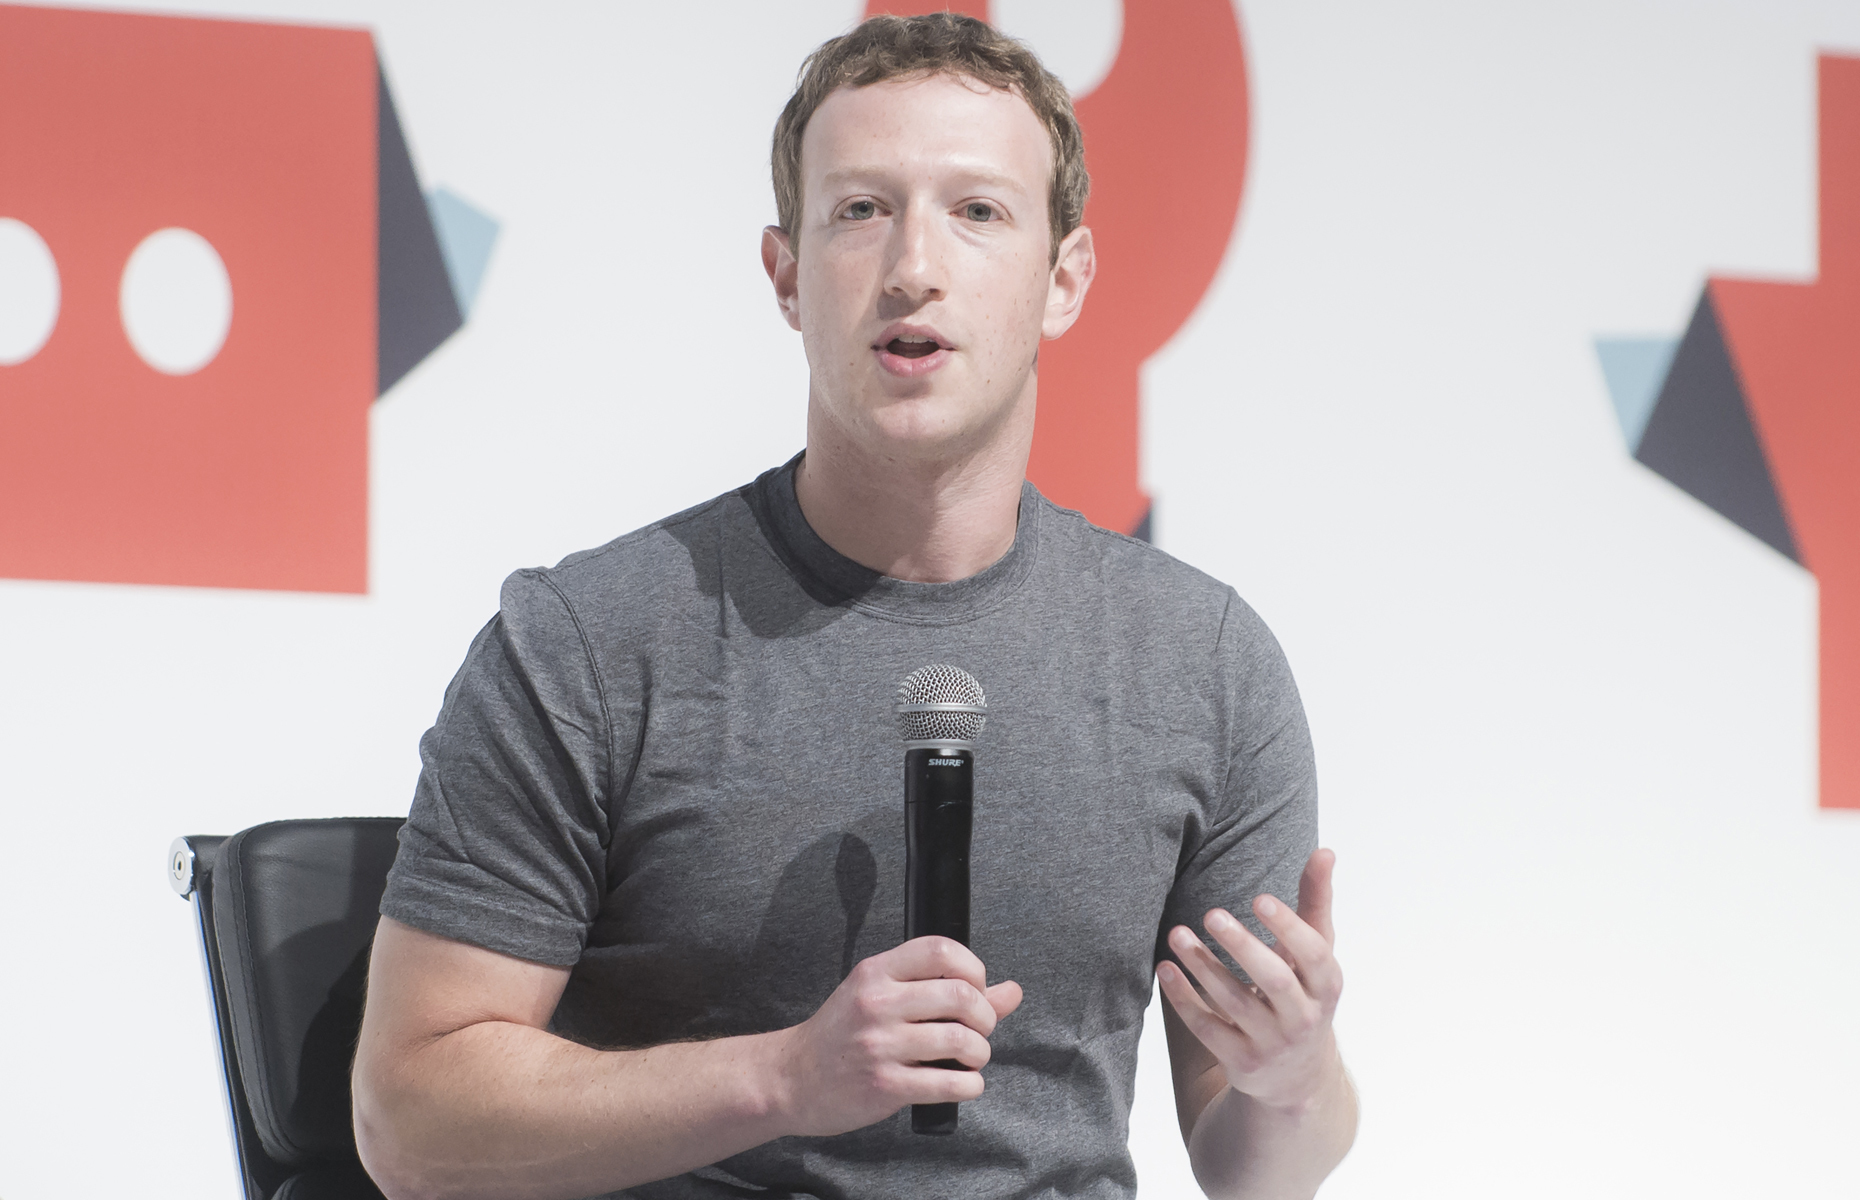 <p>A tremendous amount has changed since Facebook founder Mark Zuckerberg unleased his social media behemoth onto the world, but one thing that hasn’t is his wardrobe. In fact, <a href="https://www.independent.co.uk/news/people/why-mark-zuckerberg-wears-the-same-clothes-to-work-everyday-a6834161.html" rel="noreferrer noopener">Zuckerberg wears the same bland outfit every day</a>, claiming that dressing the same way enables him to focus his energies on more important decisions.</p>